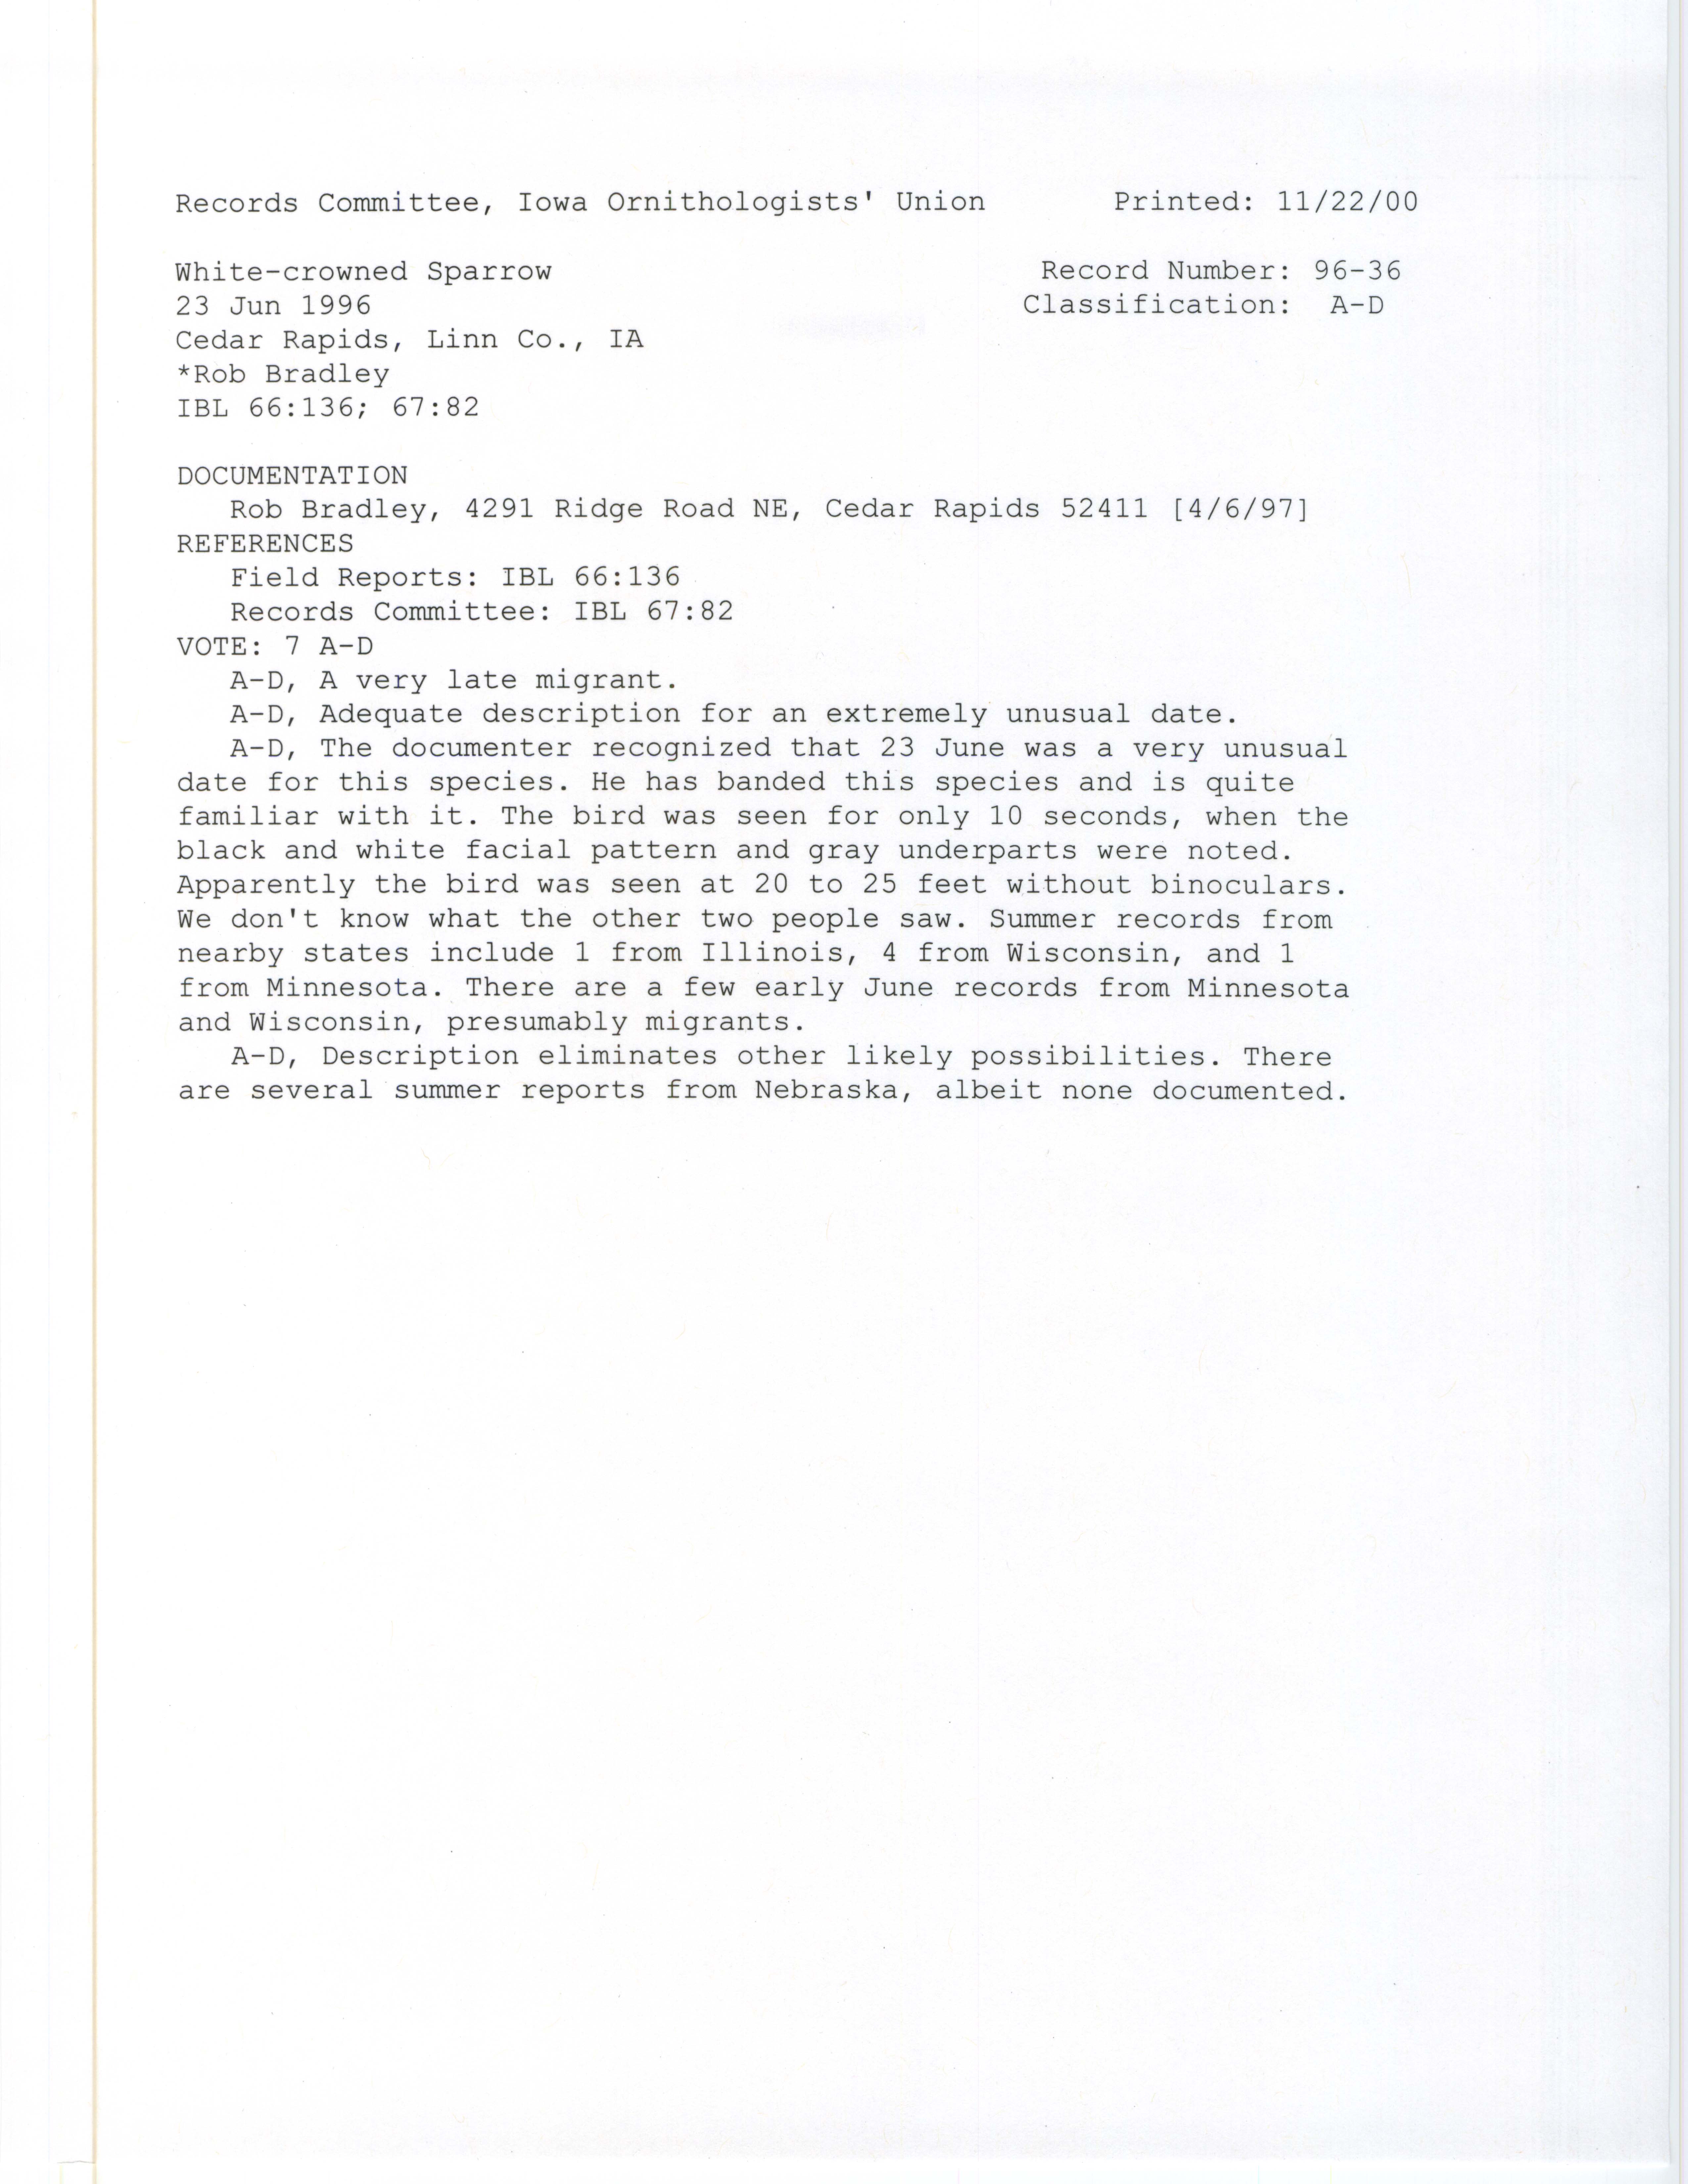 Records Committee review for rare bird sighting for White-crowned Sparrow at Cedar Rapids, 1996